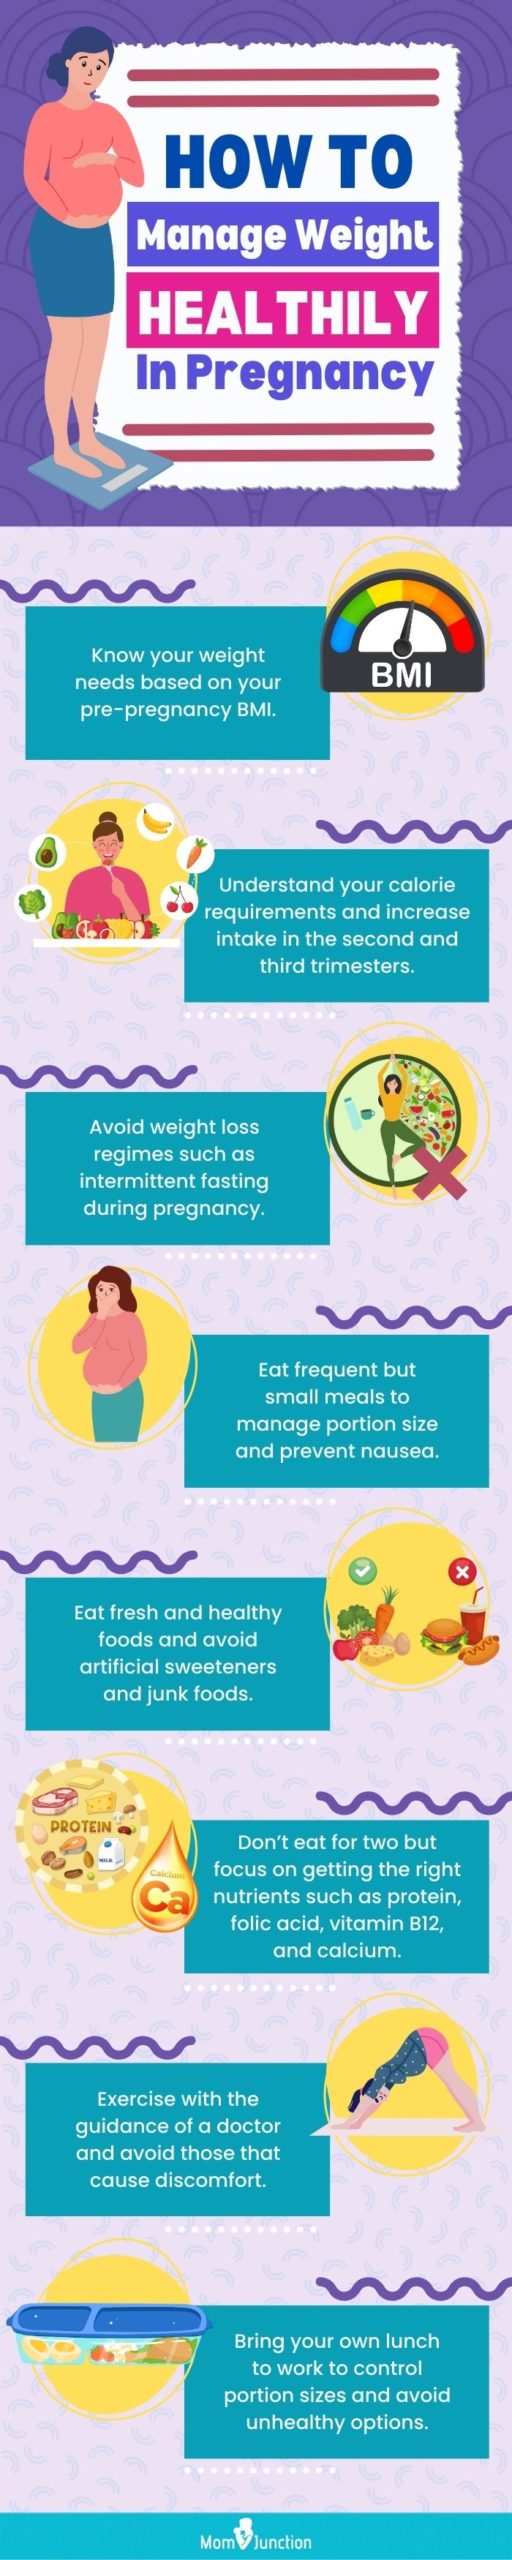 how to manage weight healthily in pregnancy (infographic)